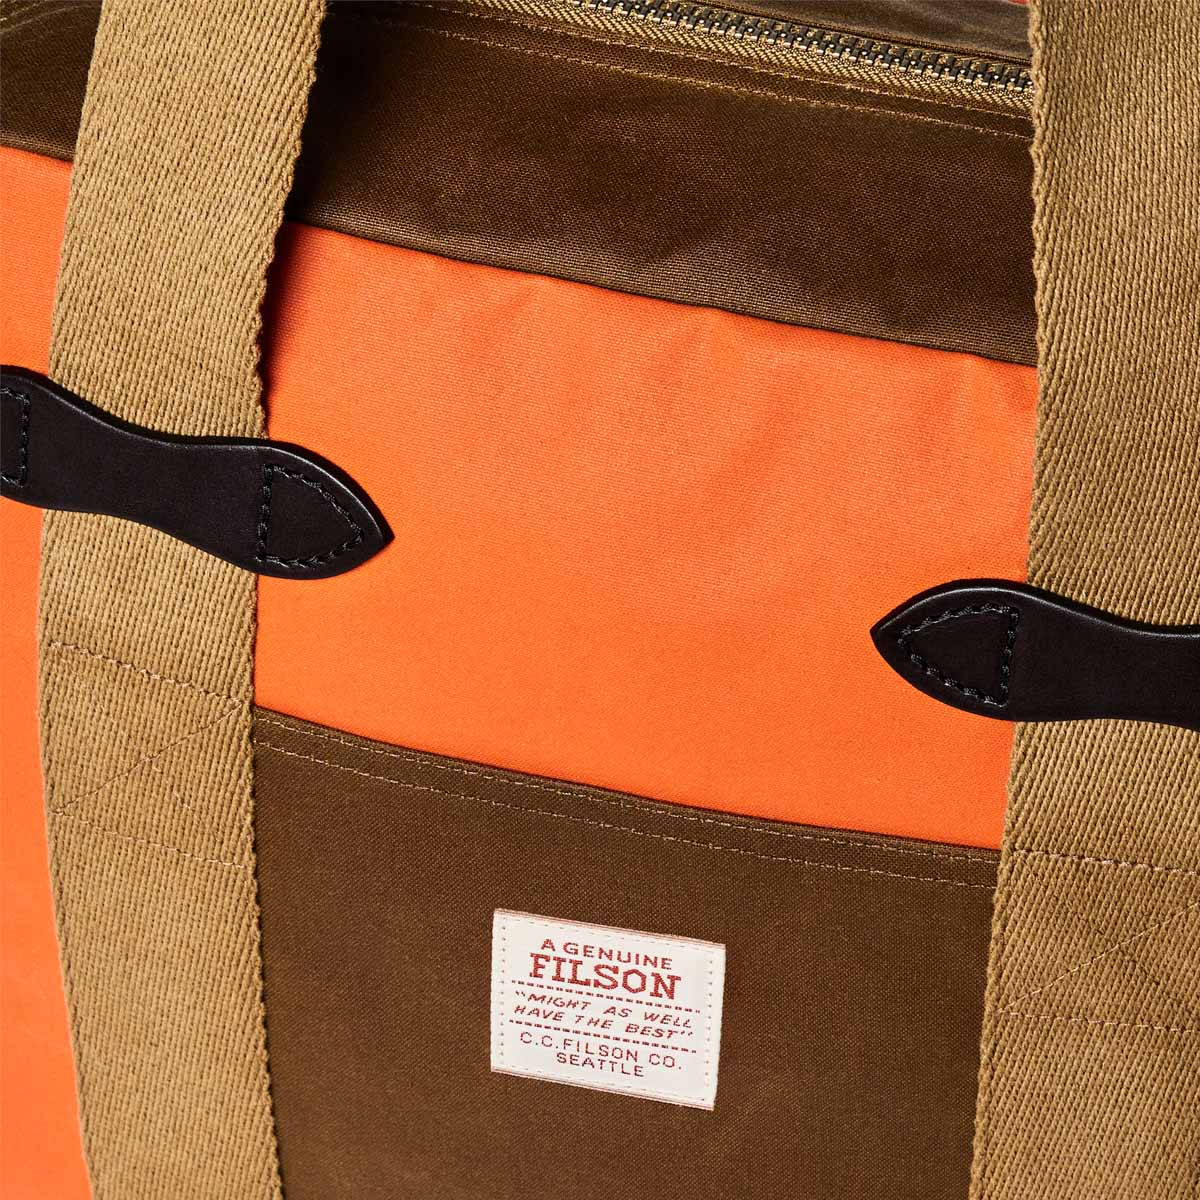 Filson Tin Cloth Tote Bag With Zipper Dark Tan/Flame, a waxed-canvas tote bag designed for comfortable carrying on your shoulder